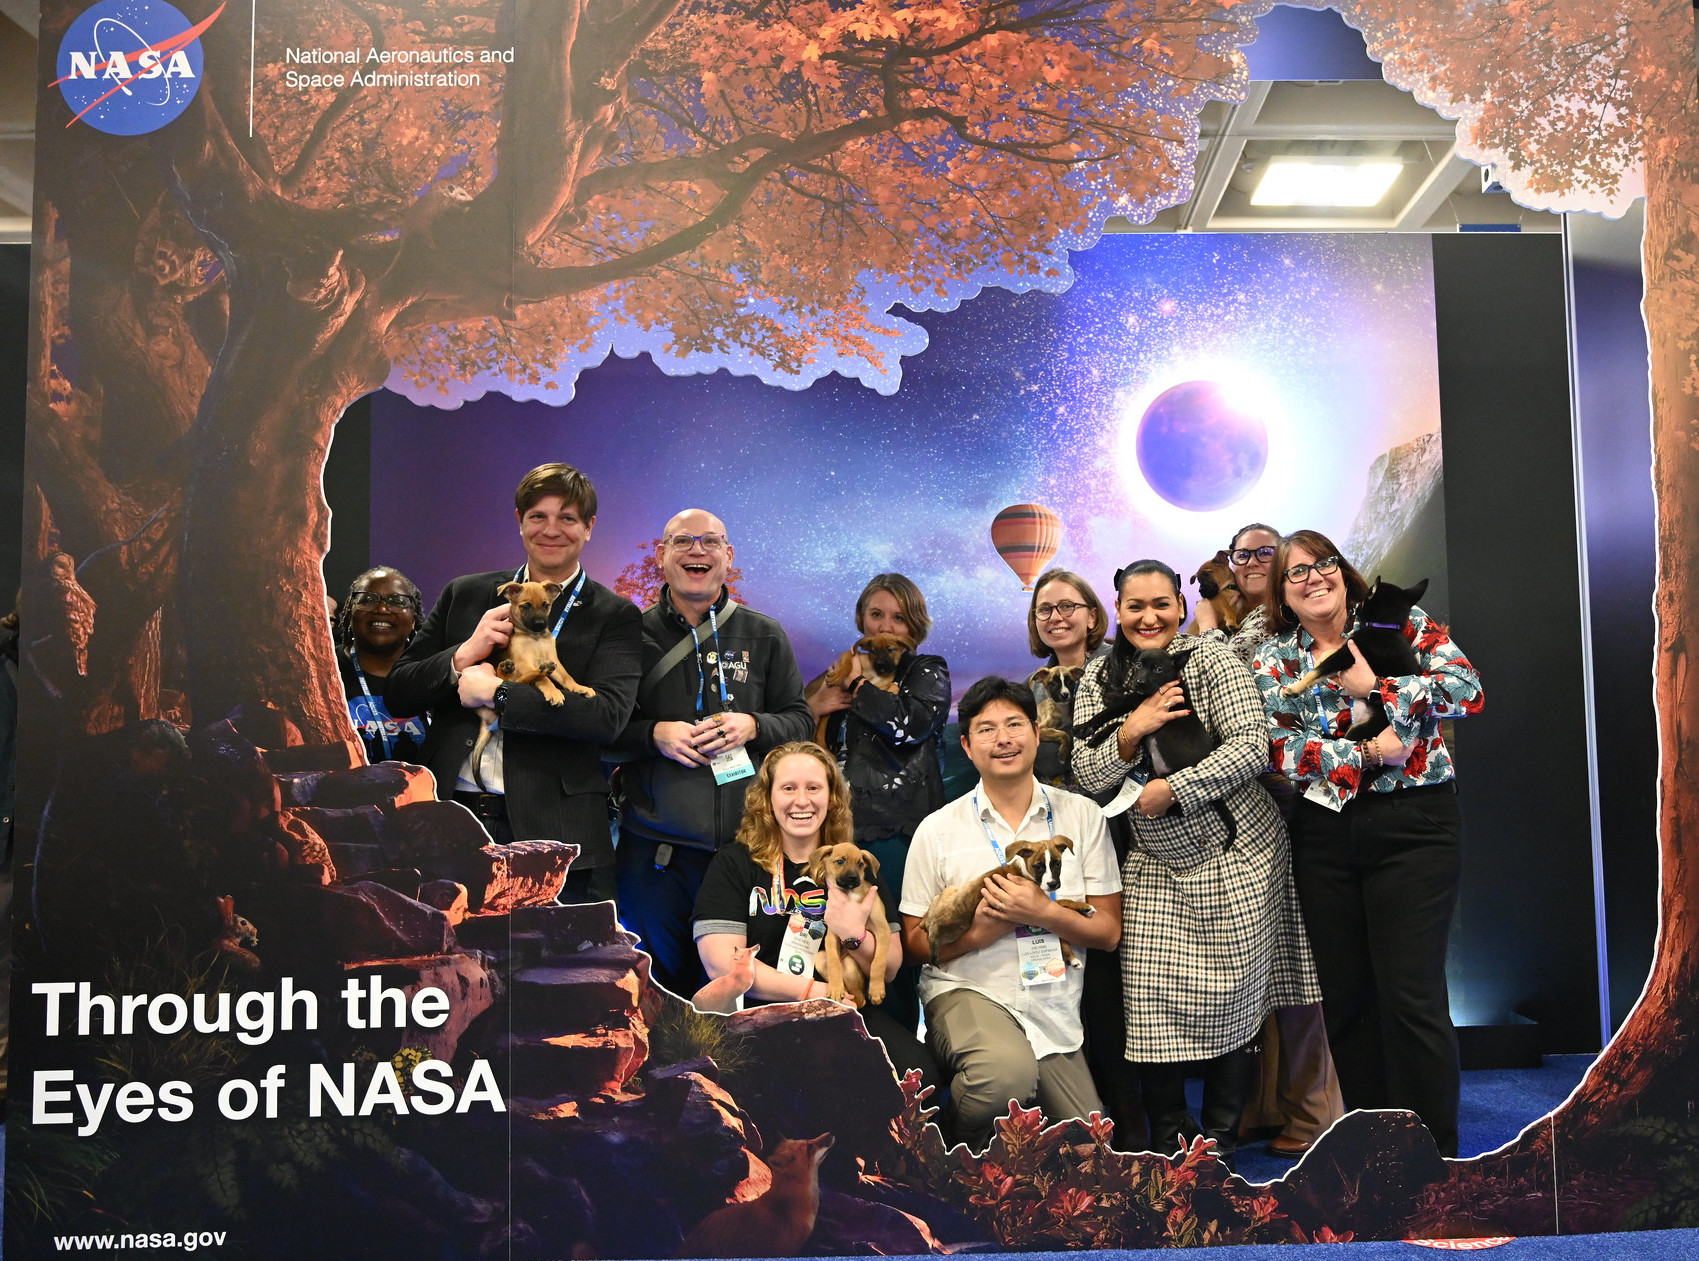 10 people standing or kneeling, holding puppies and smiling, against a backdrop that says 'through the eyes of NASA' with nasa logo and tall trees and night sky trees